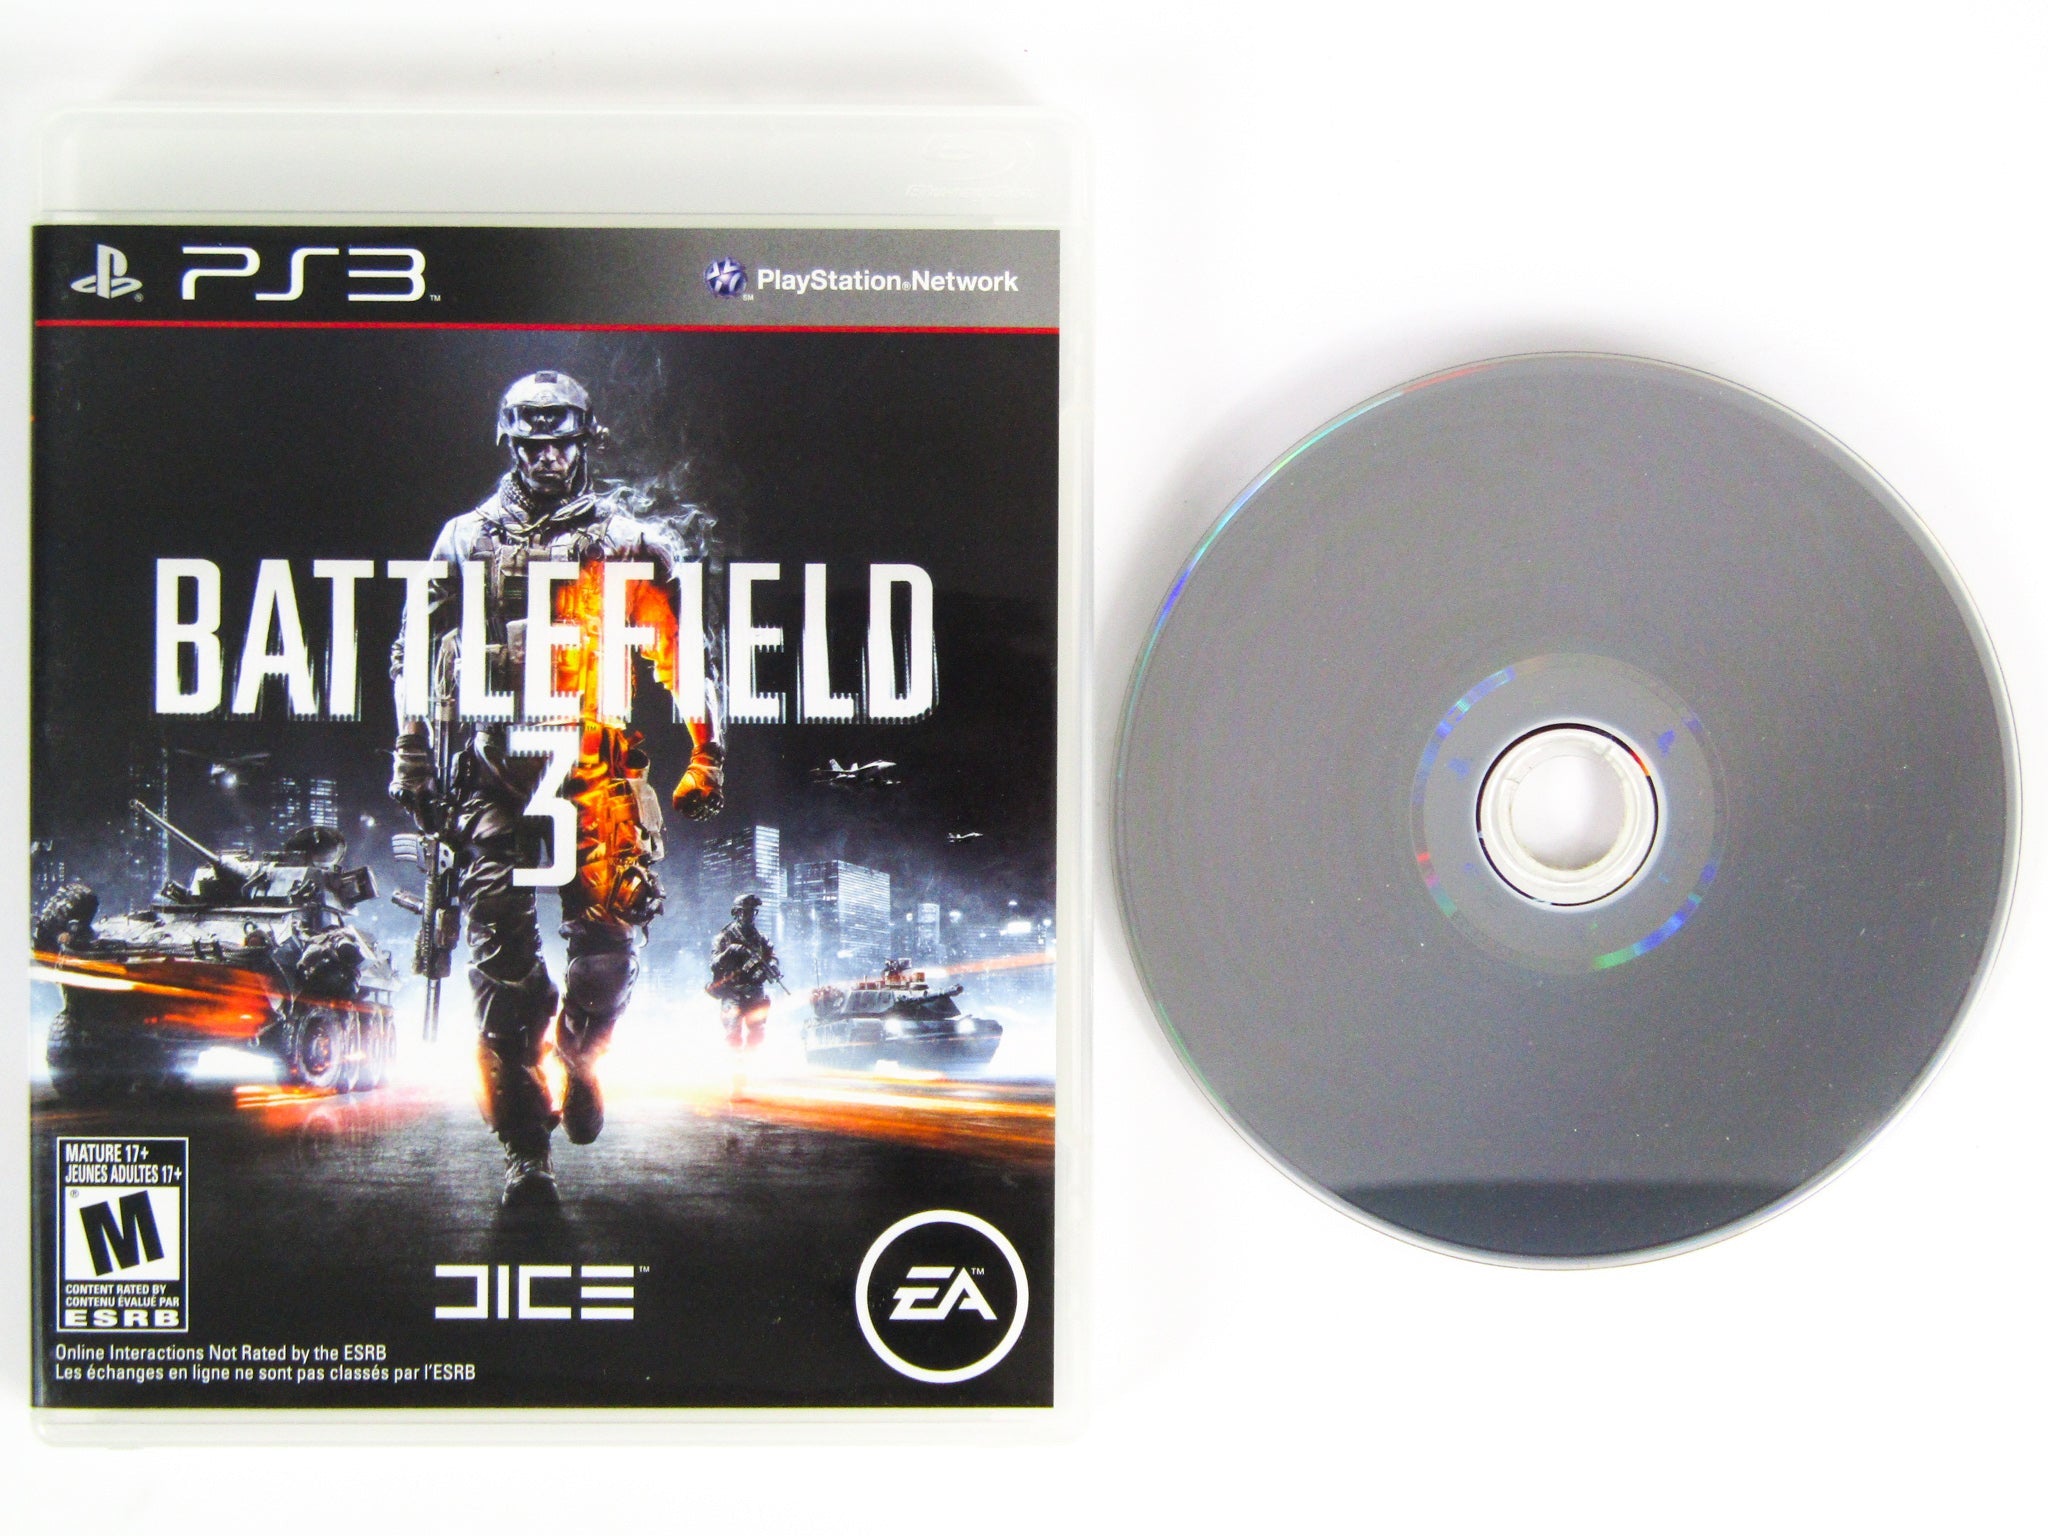 Battlefield 4 Playstation 3 PS3 Video Game Complete (SPG055763)